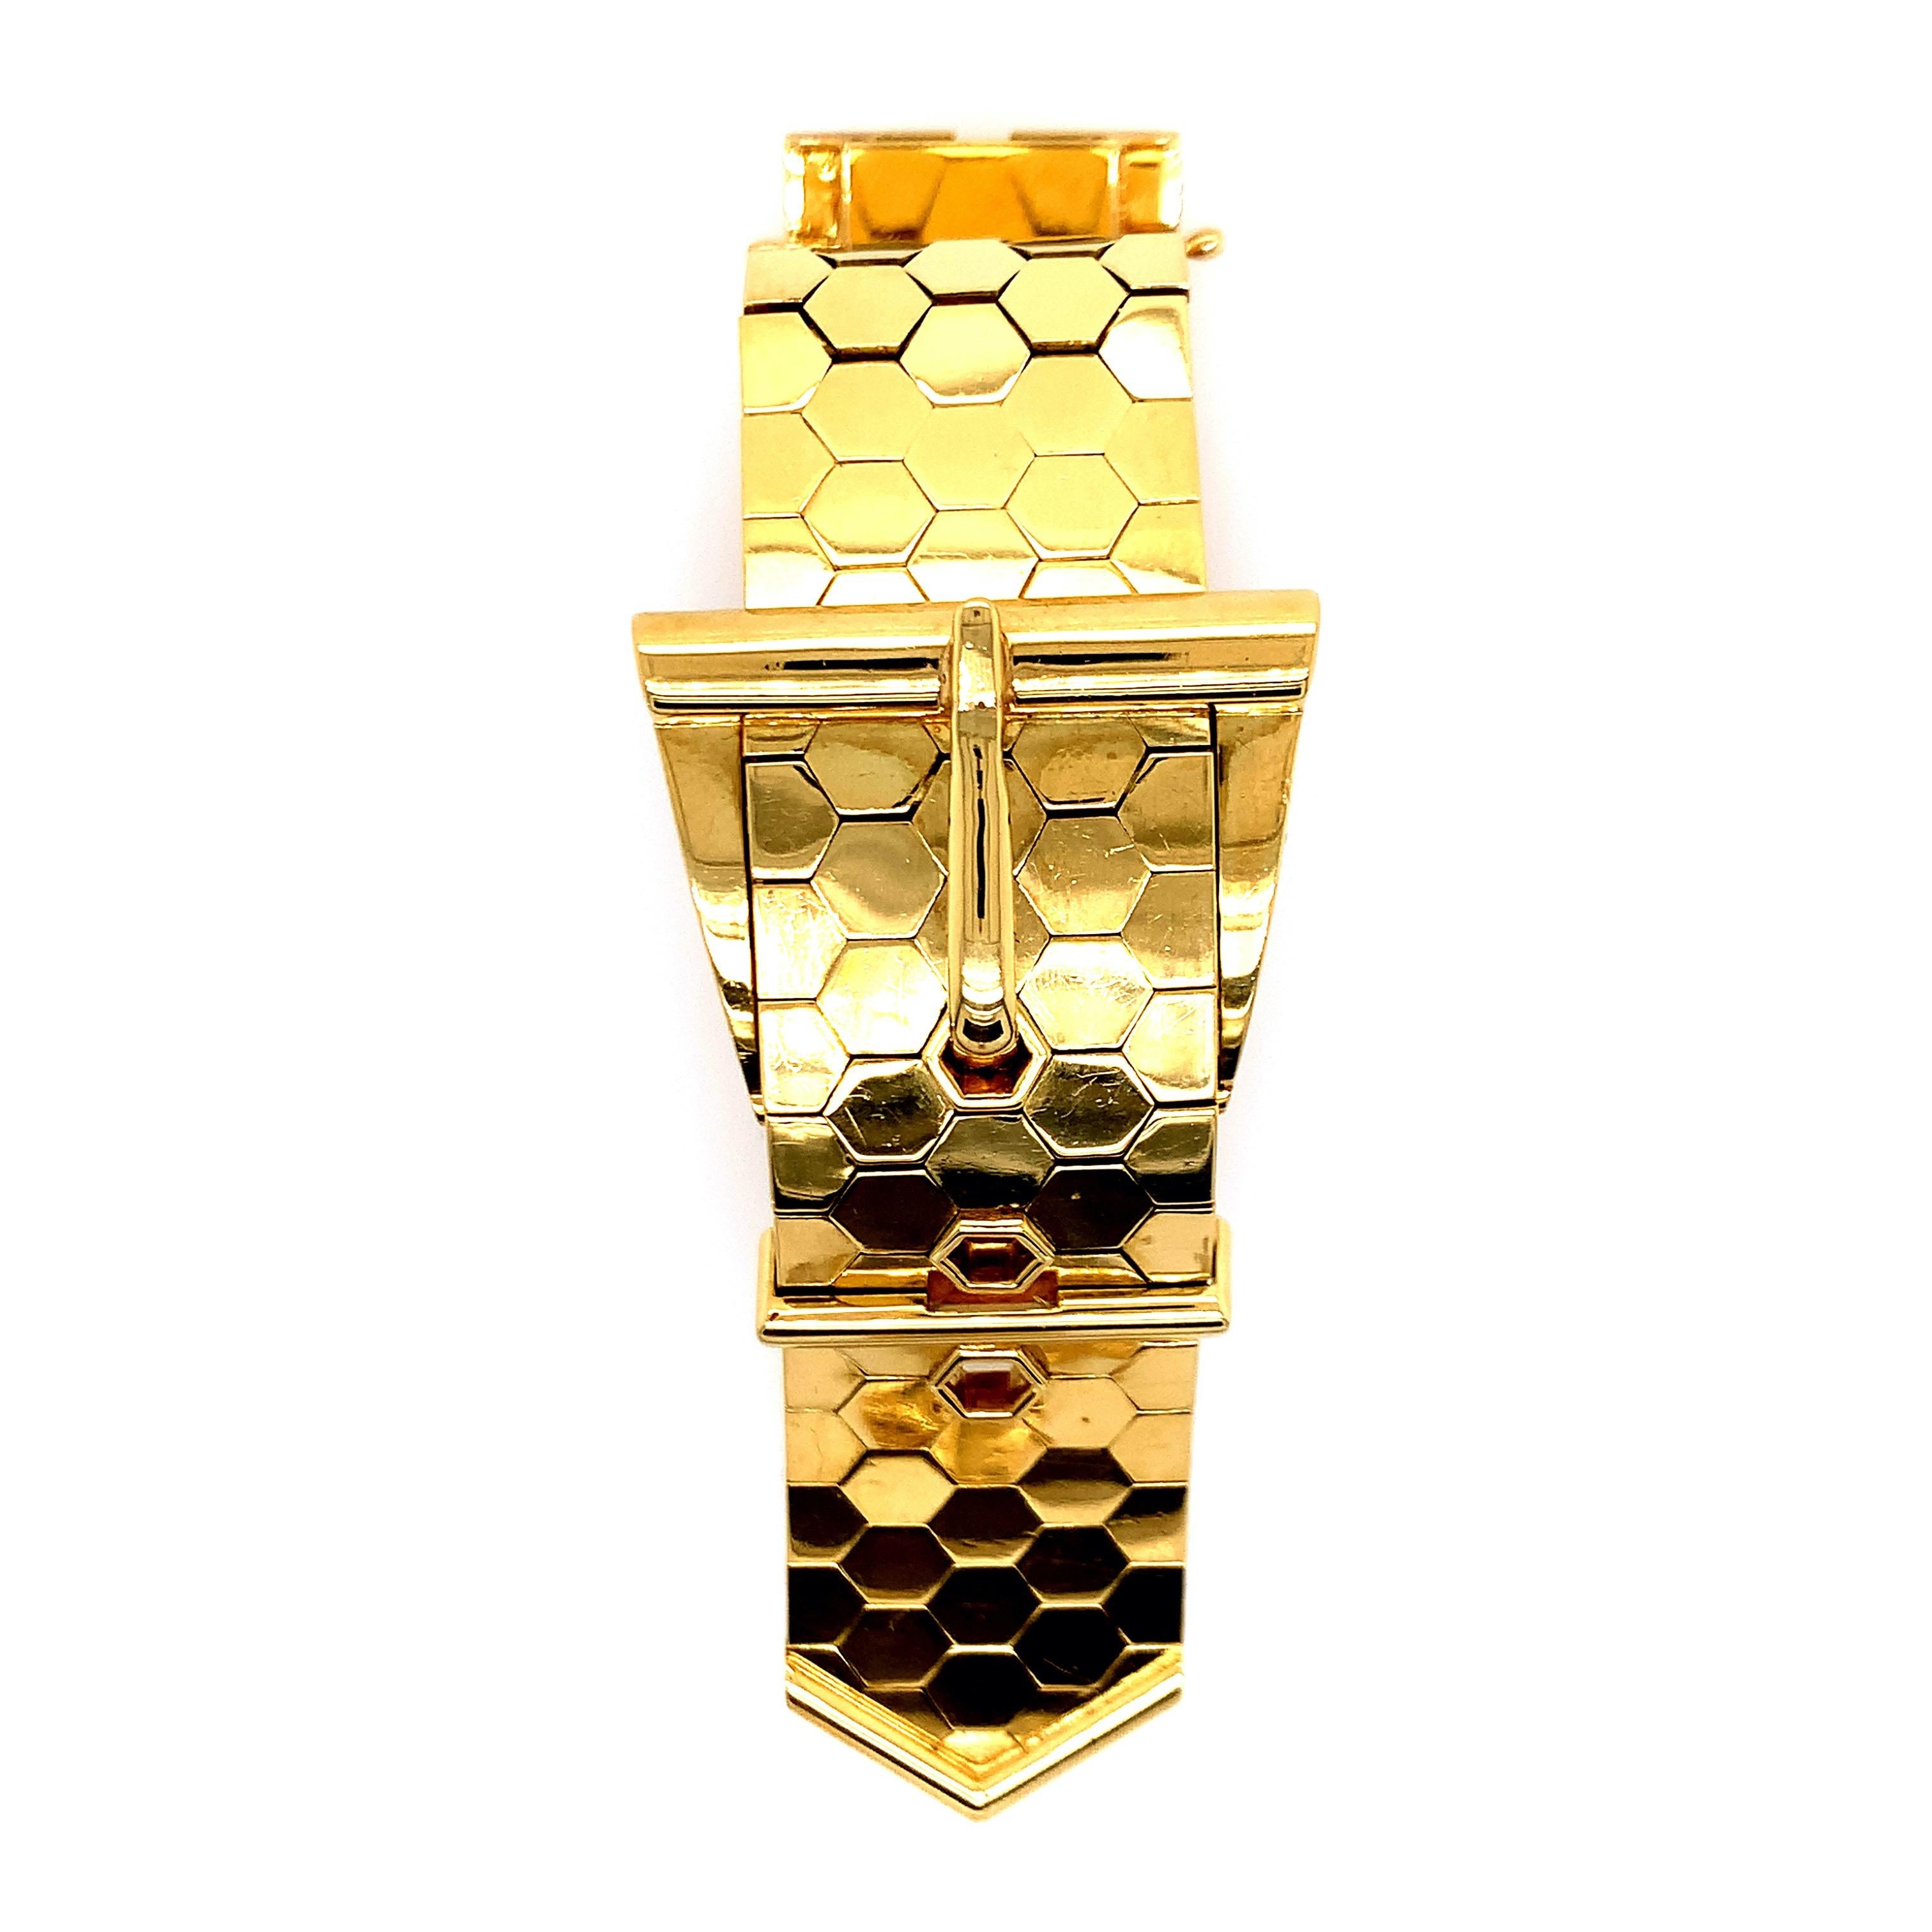 An 18 karat yellow gold wrist watch, with a belt buckle design. The strap has a honey comb pattern, allowing it to be flexible. The movement is International Watch Company (IWC). Made in Switzerland. Maker's mark: HP. Serial No. 1362265. Inner